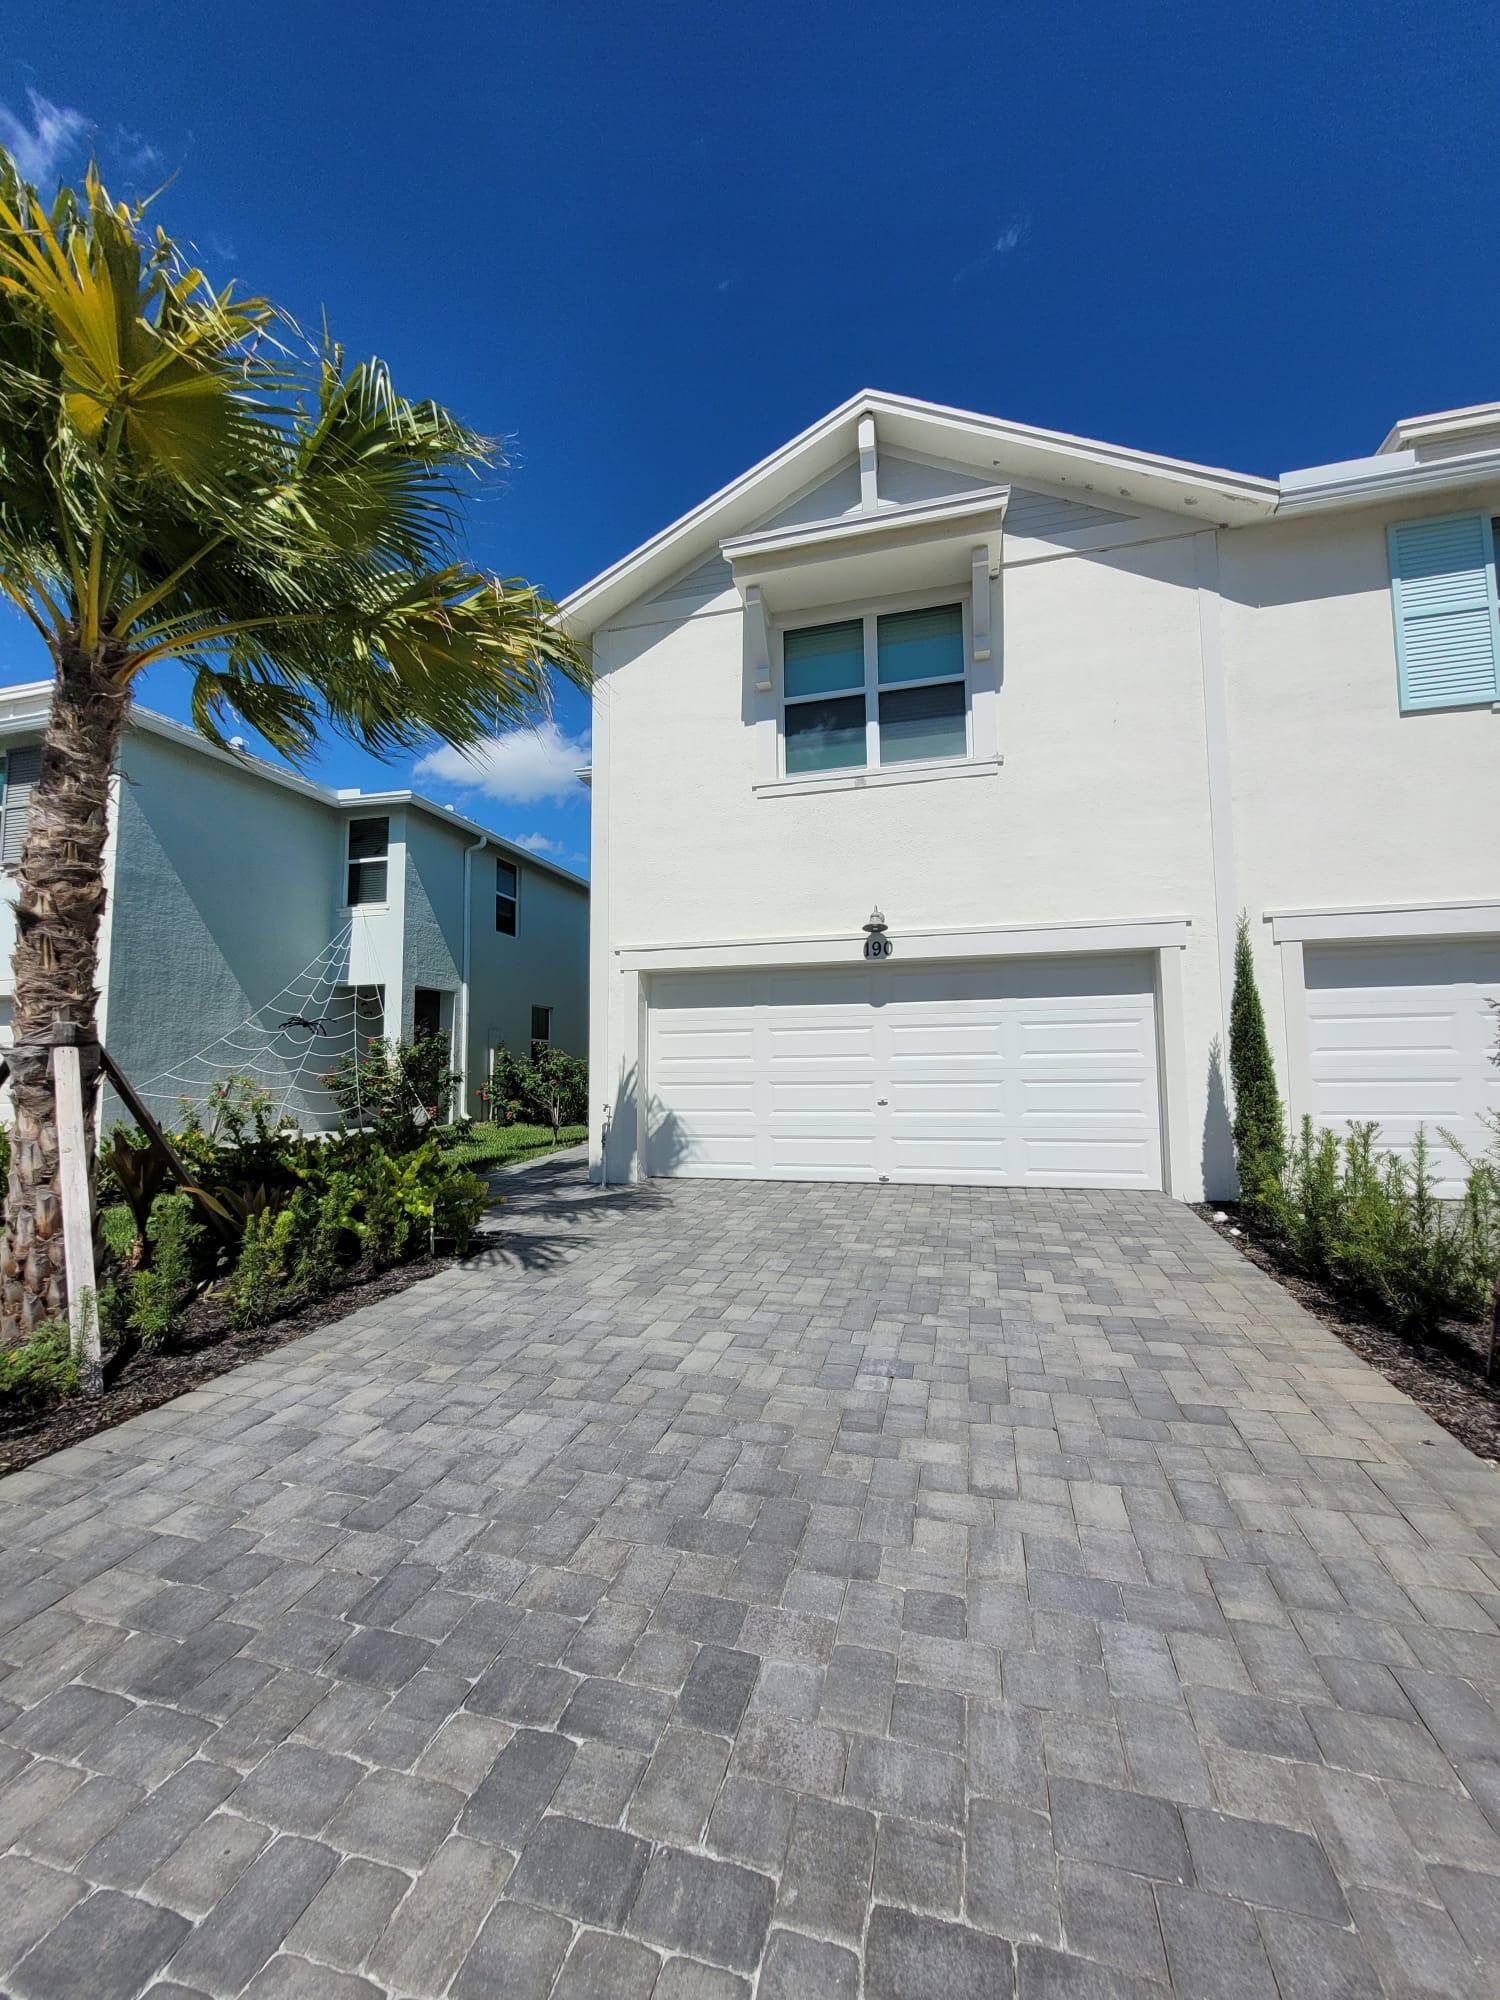 Featuring, this brand new Contruction town home in Jensen Beach featuring, 3 bedroom 2 1 2 bath, open concept, amenities include gated community.